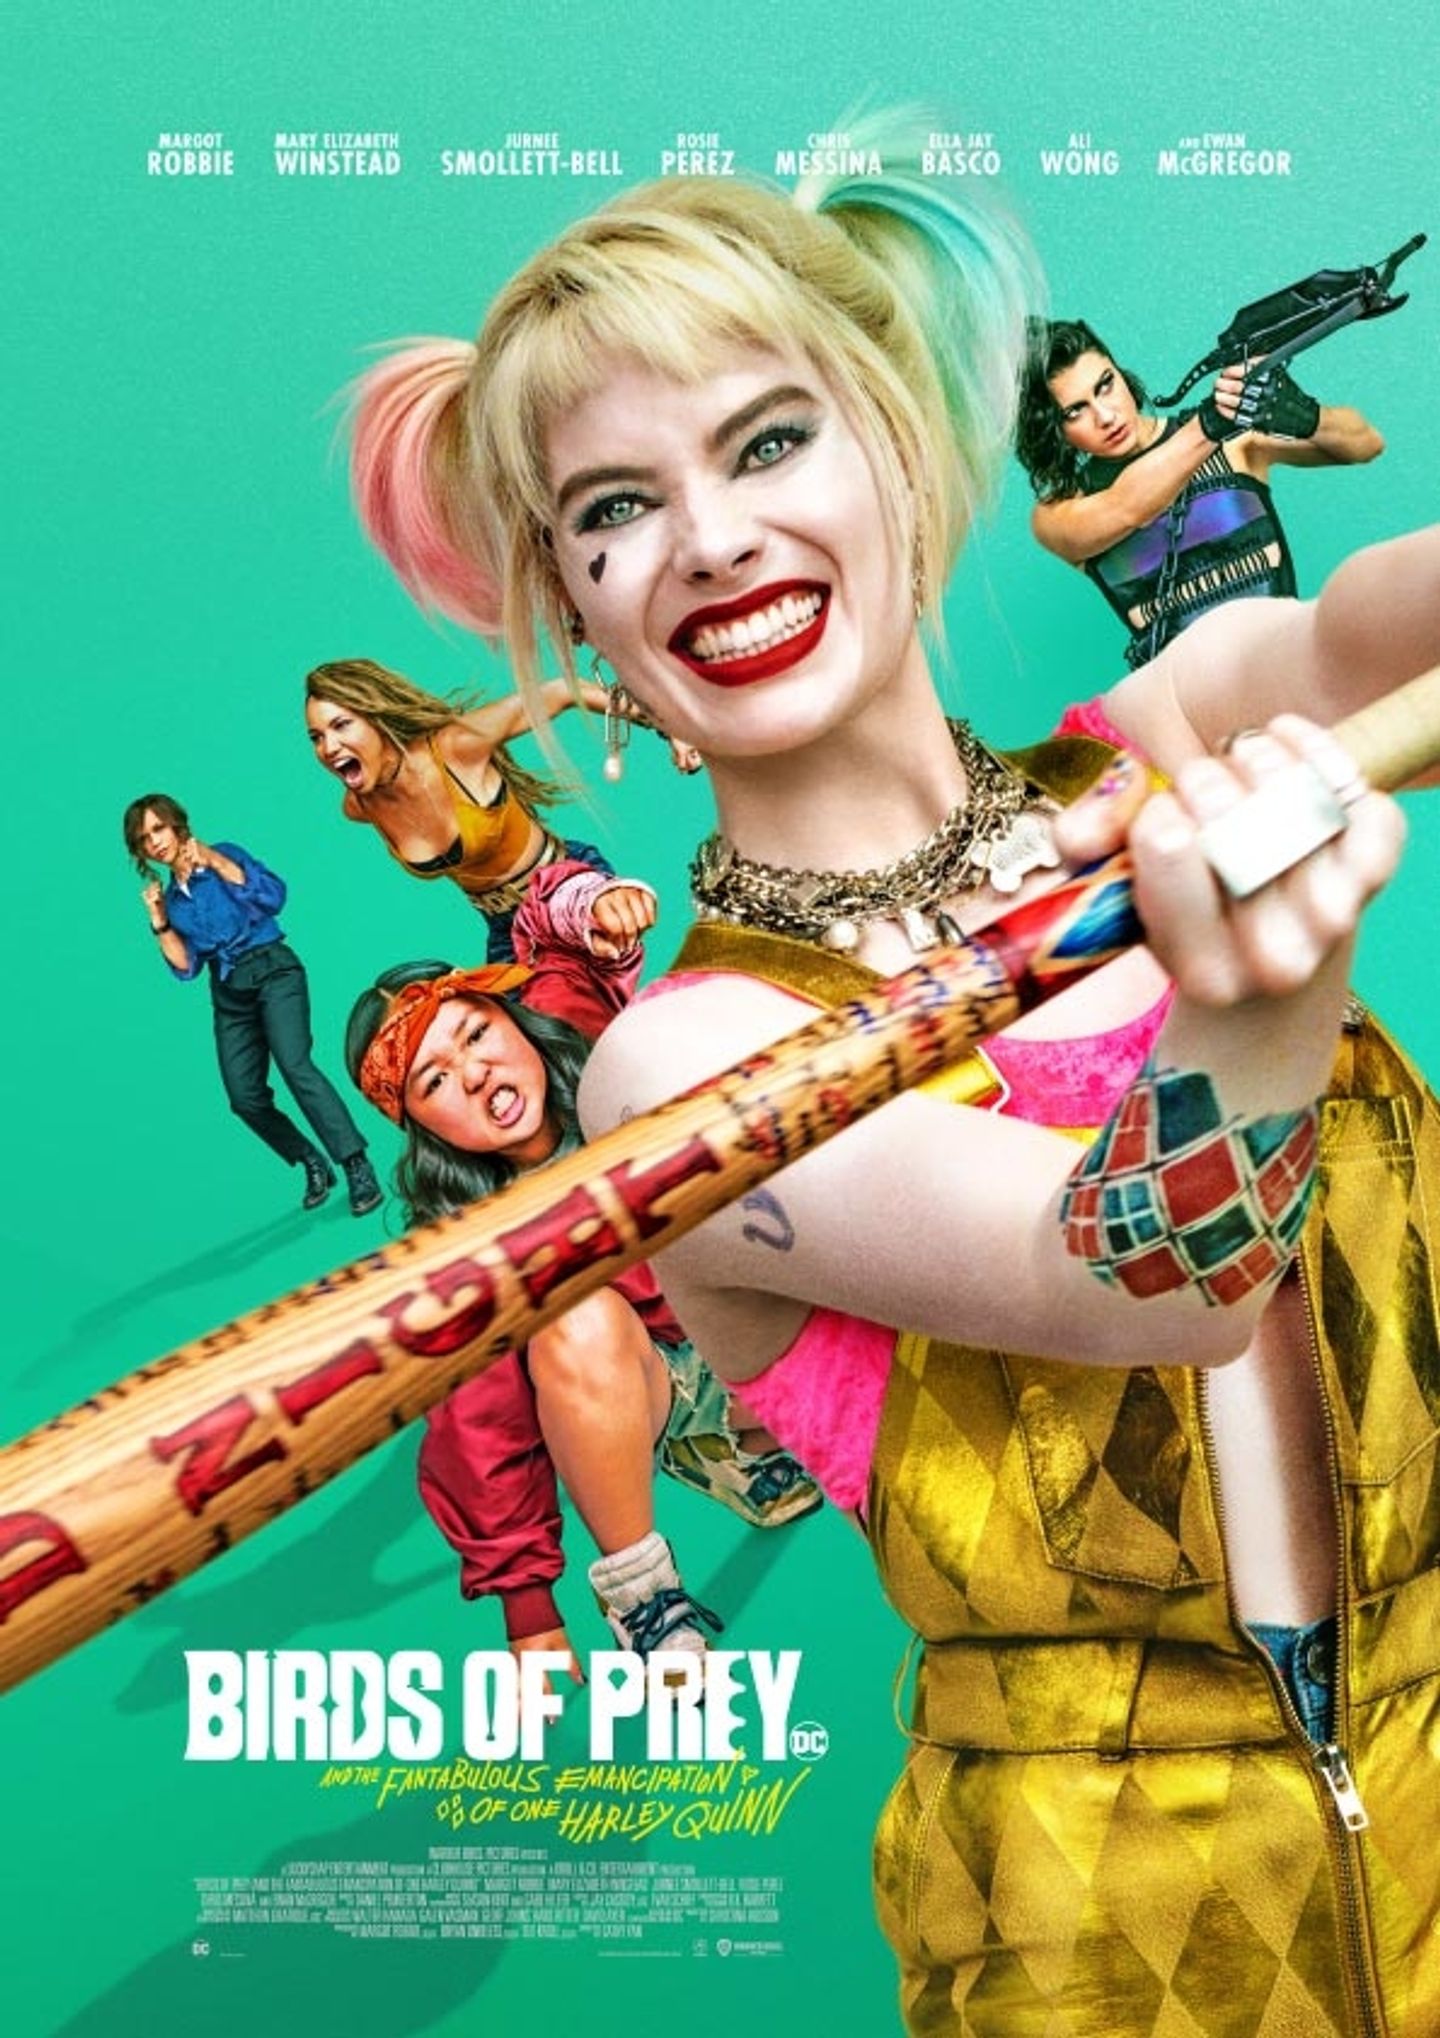 Plakat for 'Birds of Prey (And the Fantabulous Emancipation of one Harley Quinn)'